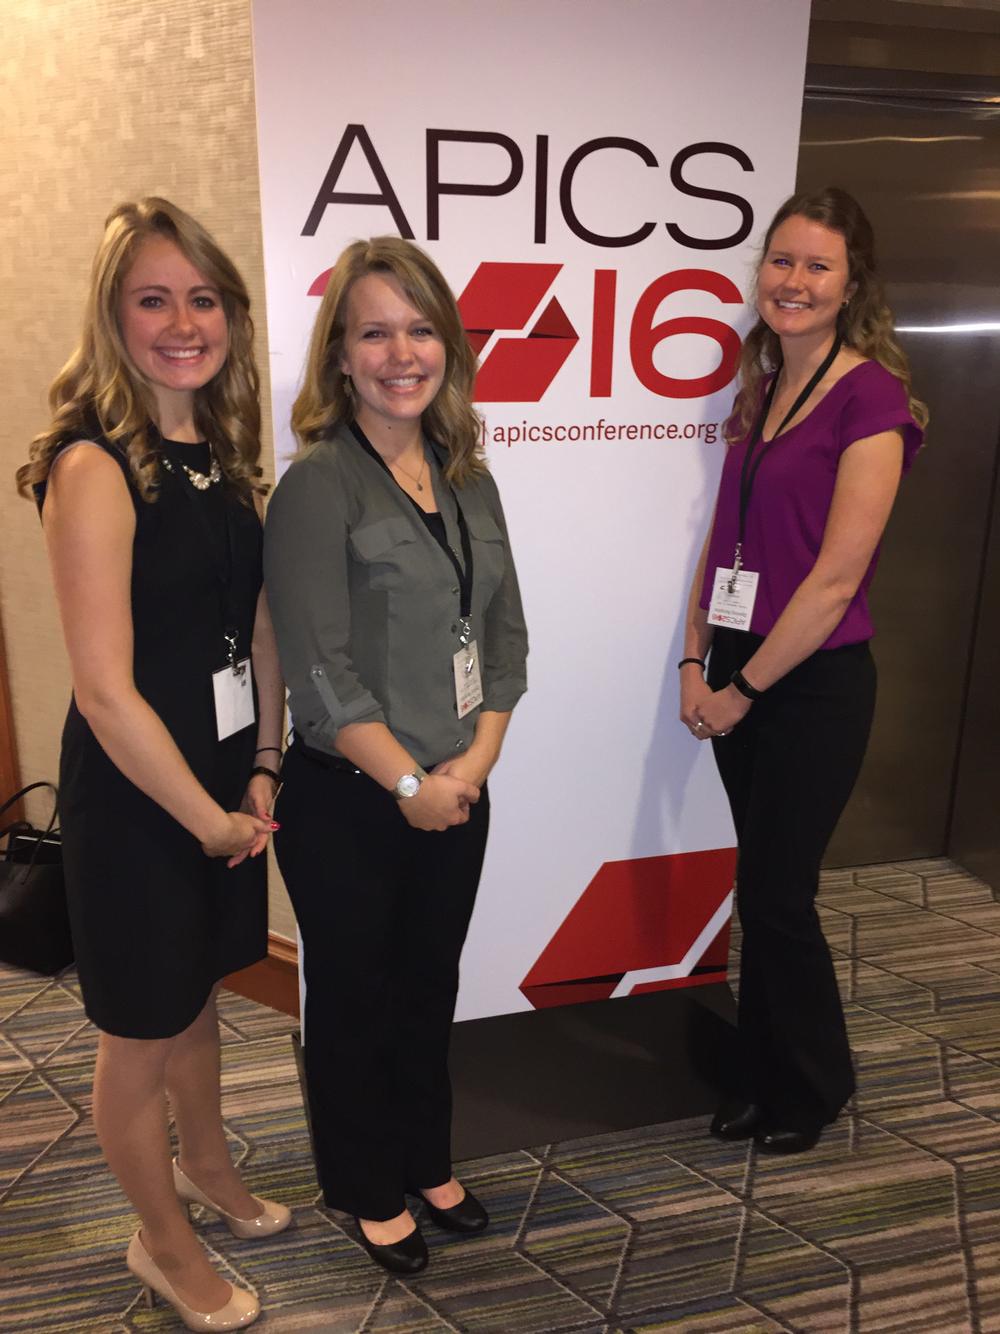 Rachel Travis, left, is pictured at the APICS conference in Washington, D.C. Travis gave a poster presentation about increasing supplier diversity, which stemmed from her work in Intercultural Training Certificate program.